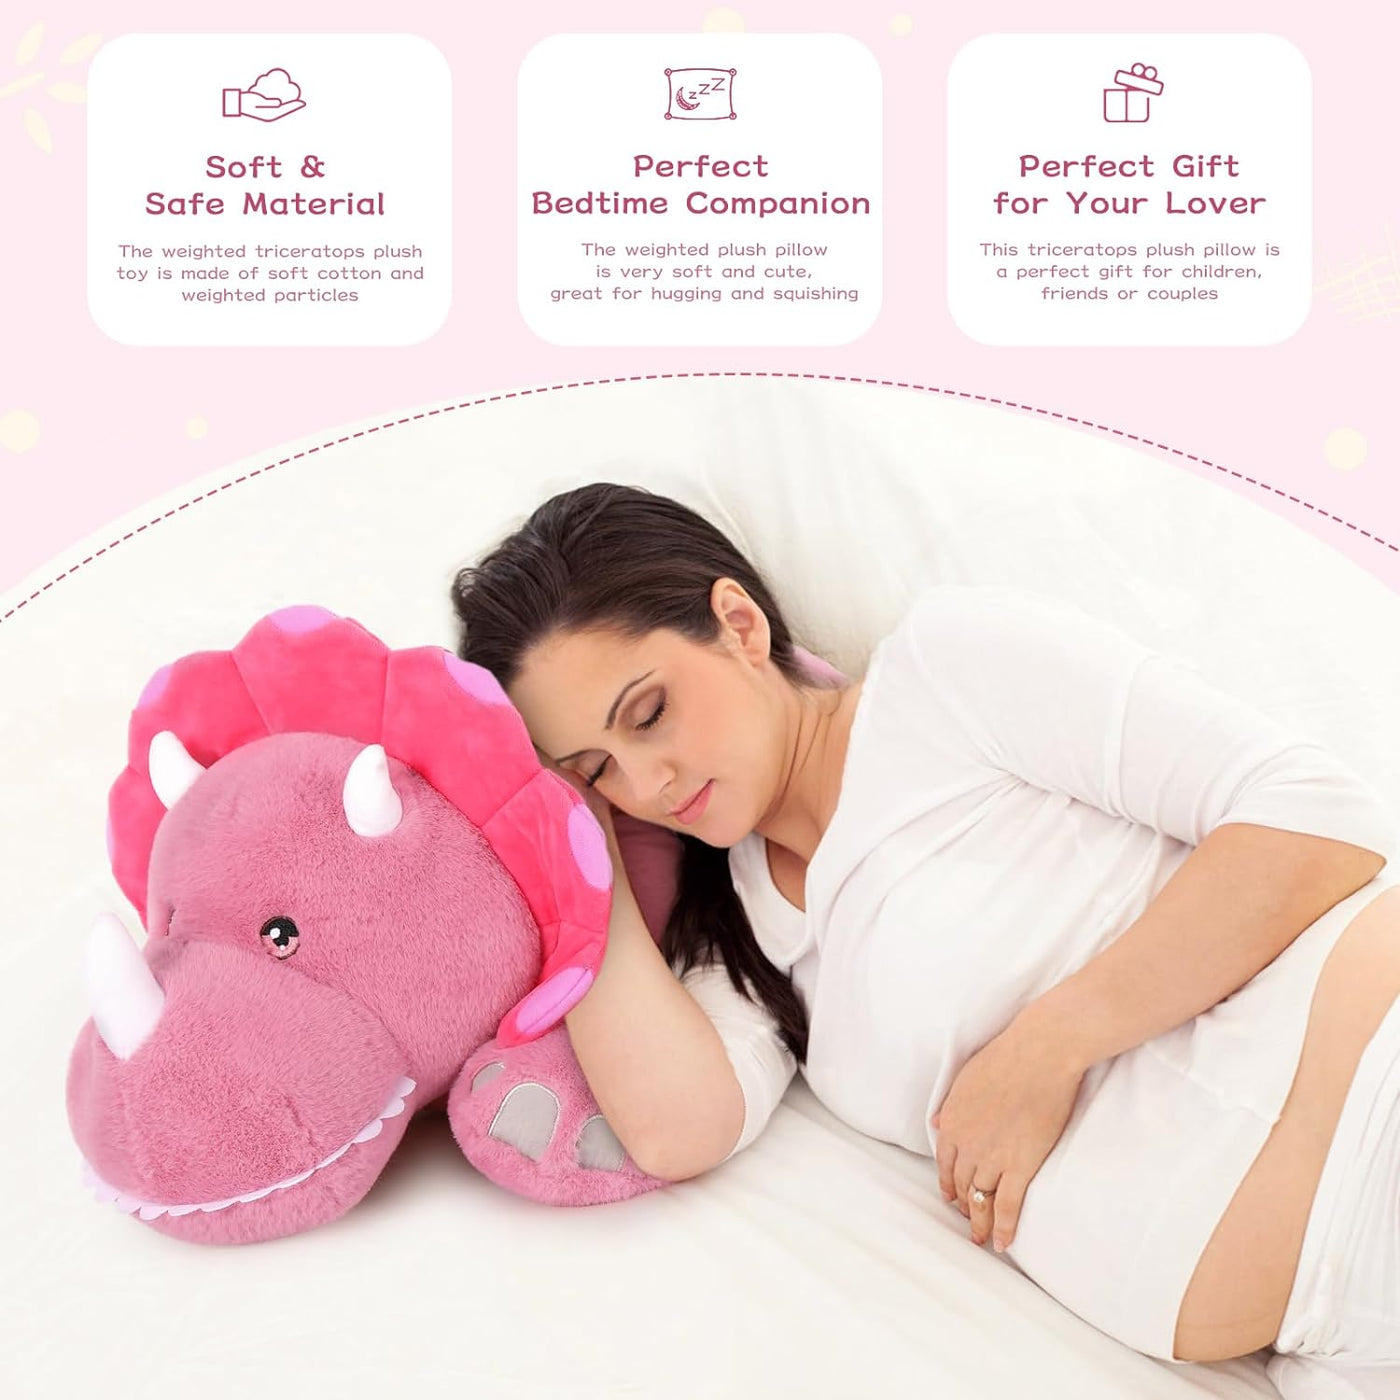 Triceratops Glow-in-the-dark Weighted Plush Toy, Pink, 31.5 Inches - MorisMos Stuffed Toys